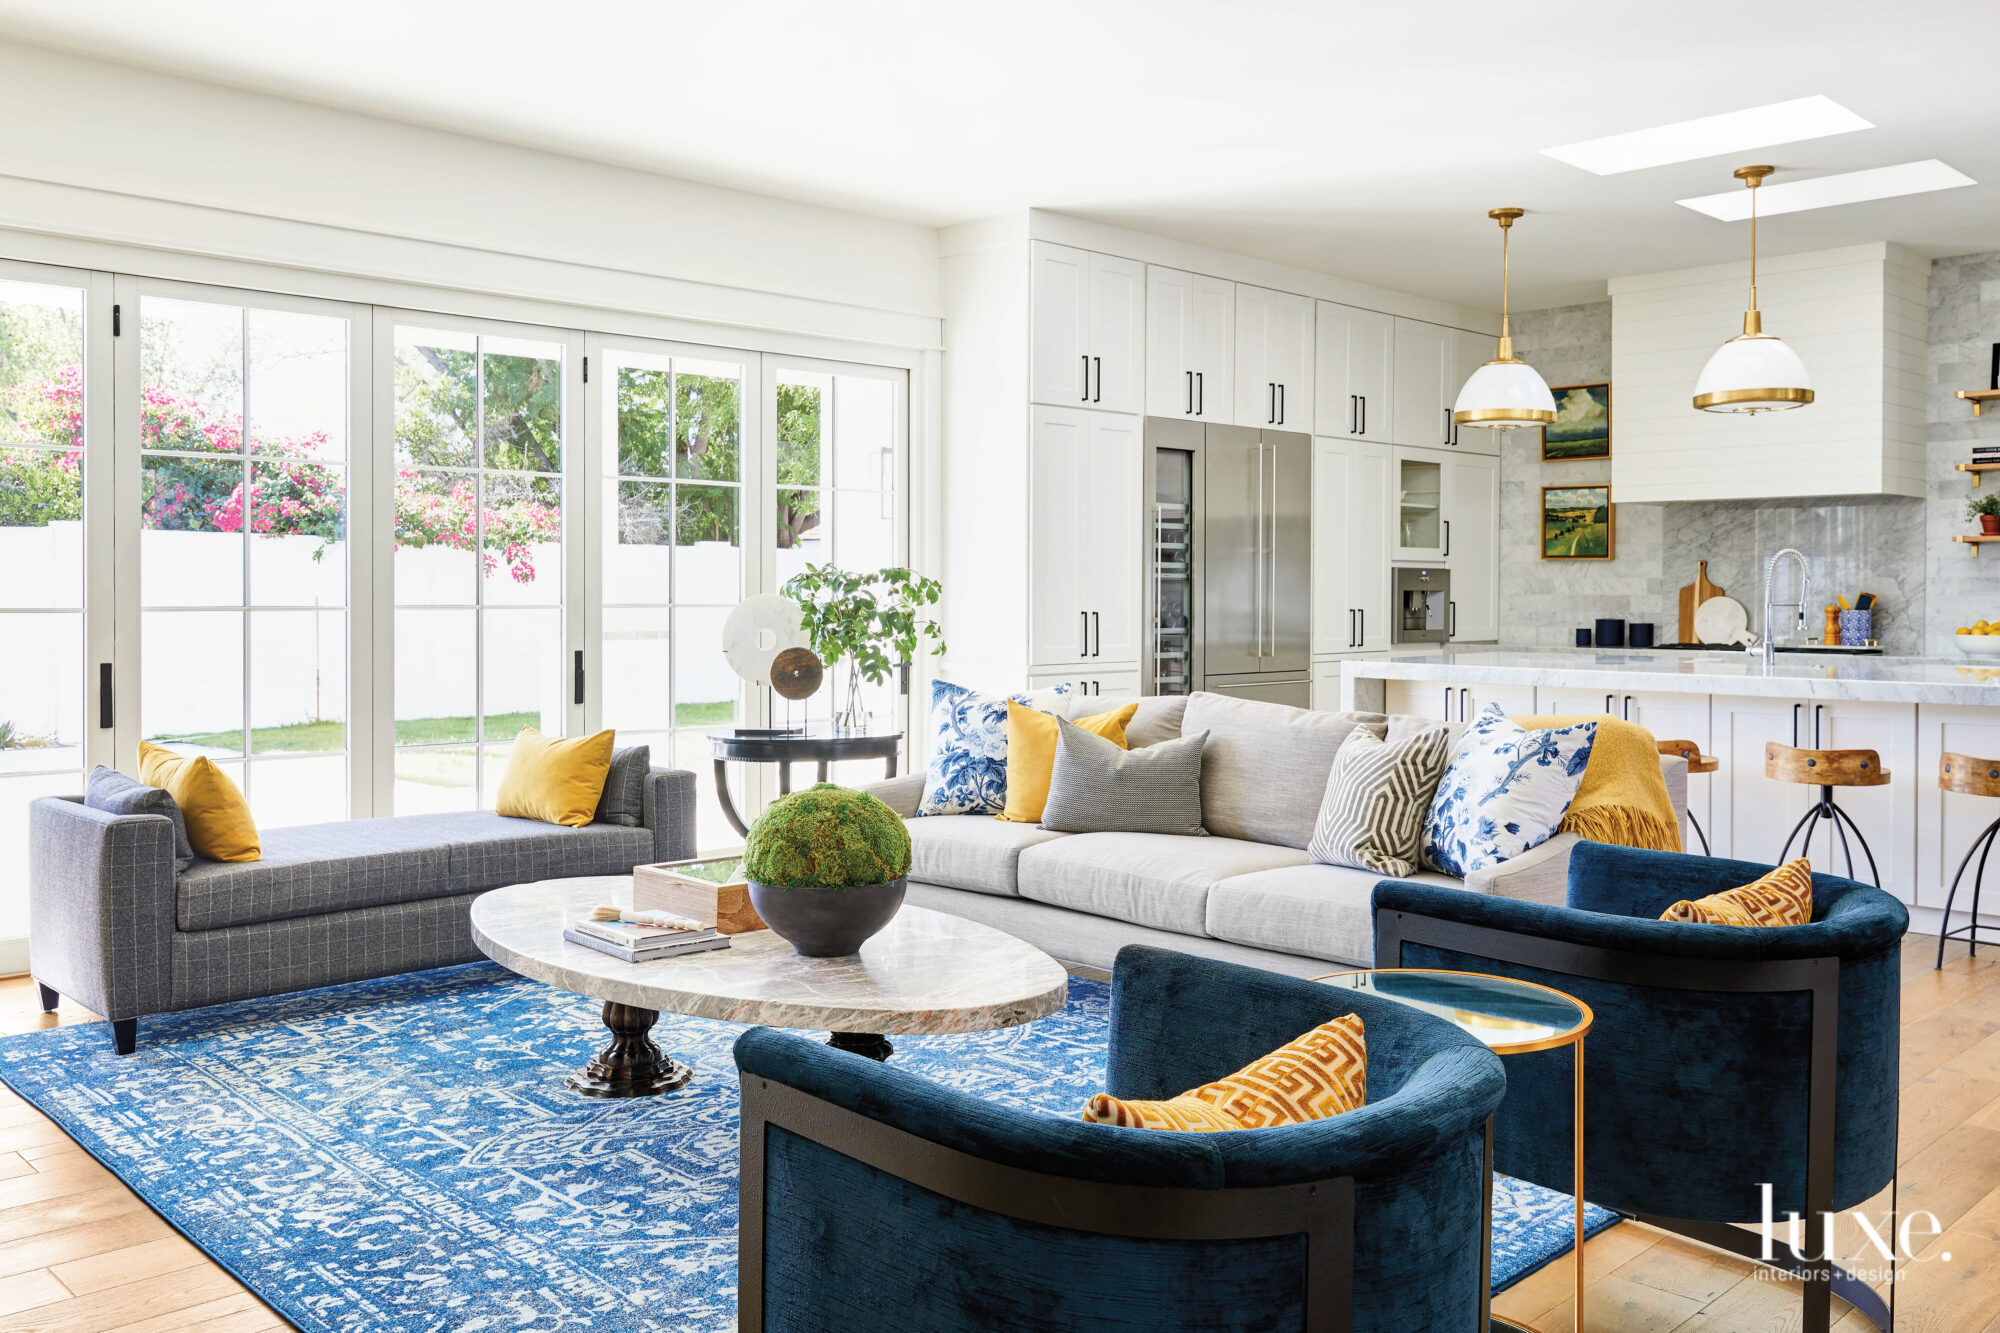 The living room is a mix of blue and gray furniture, a blue rug and yellow accents.